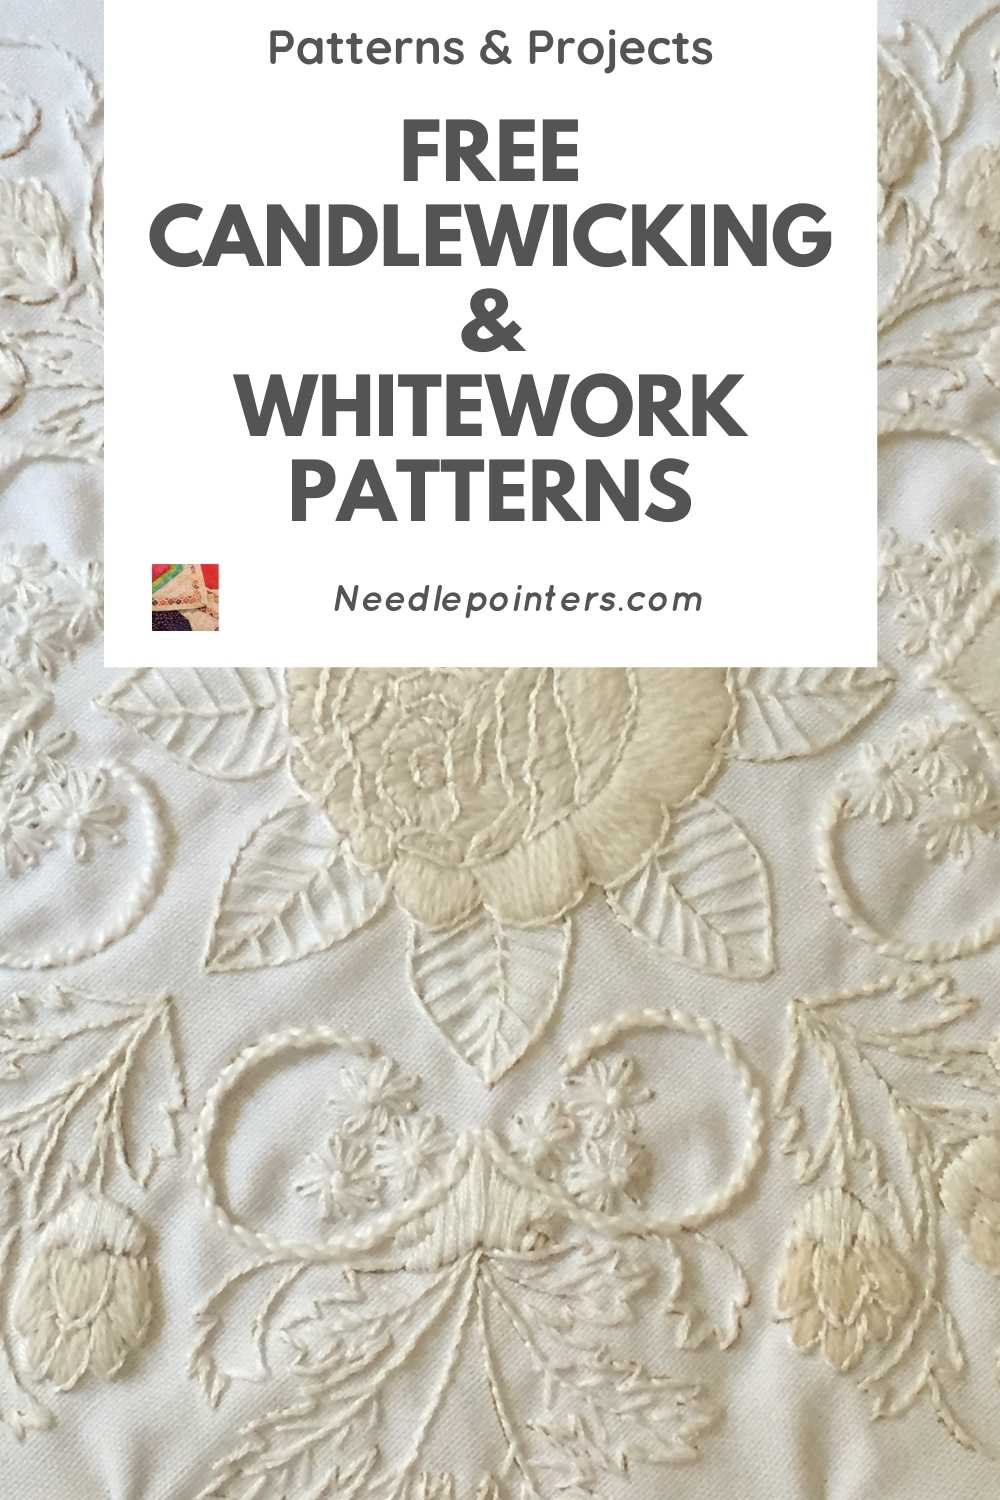 Free Projects and Patterns for Candlewicking & Whitework